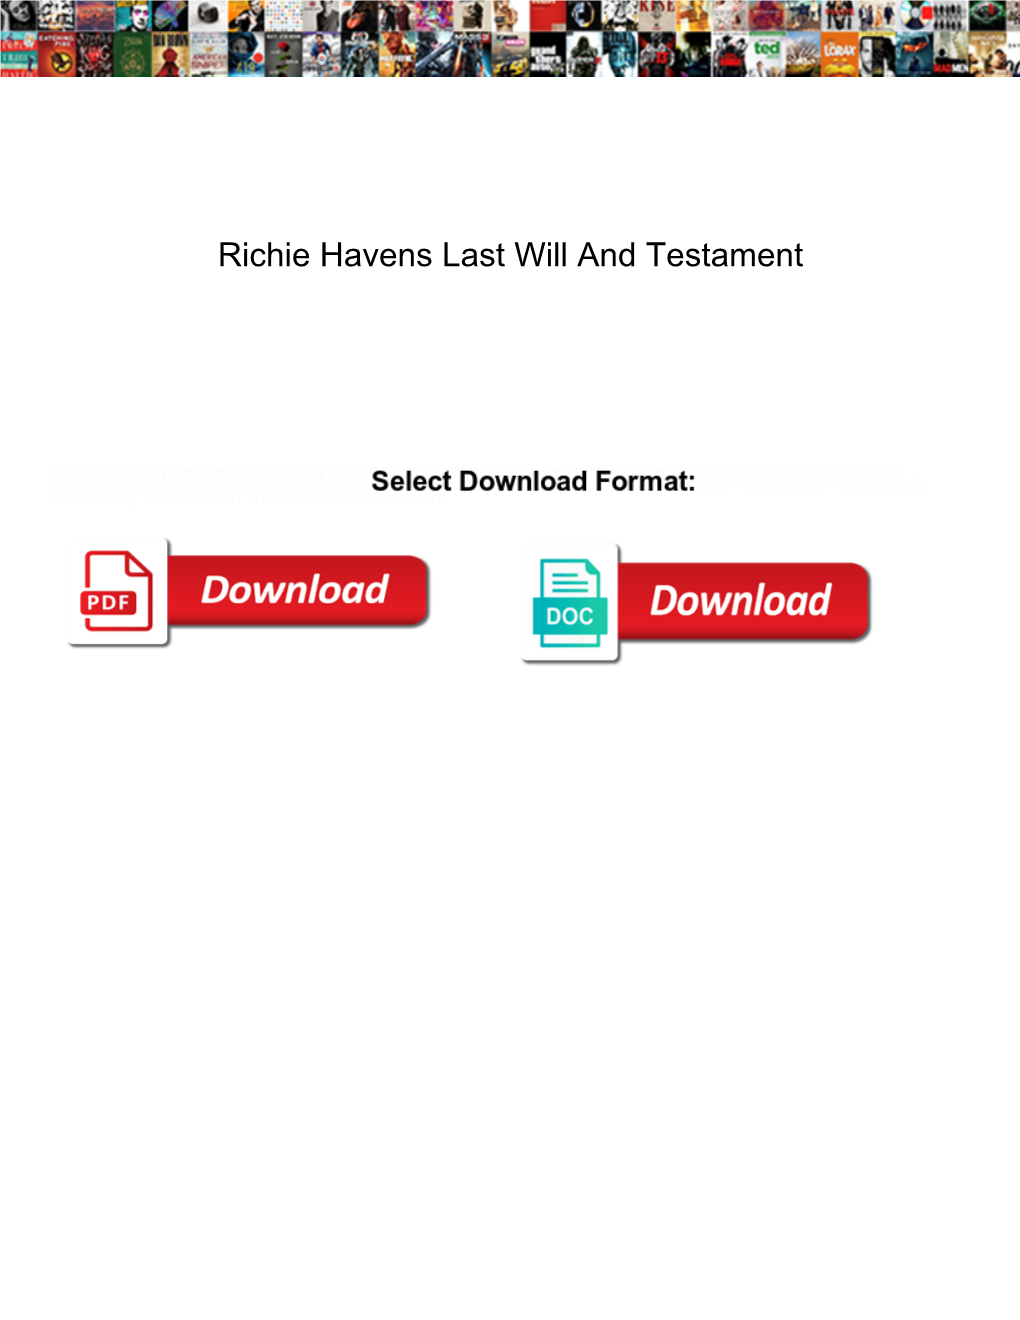 Richie Havens Last Will and Testament